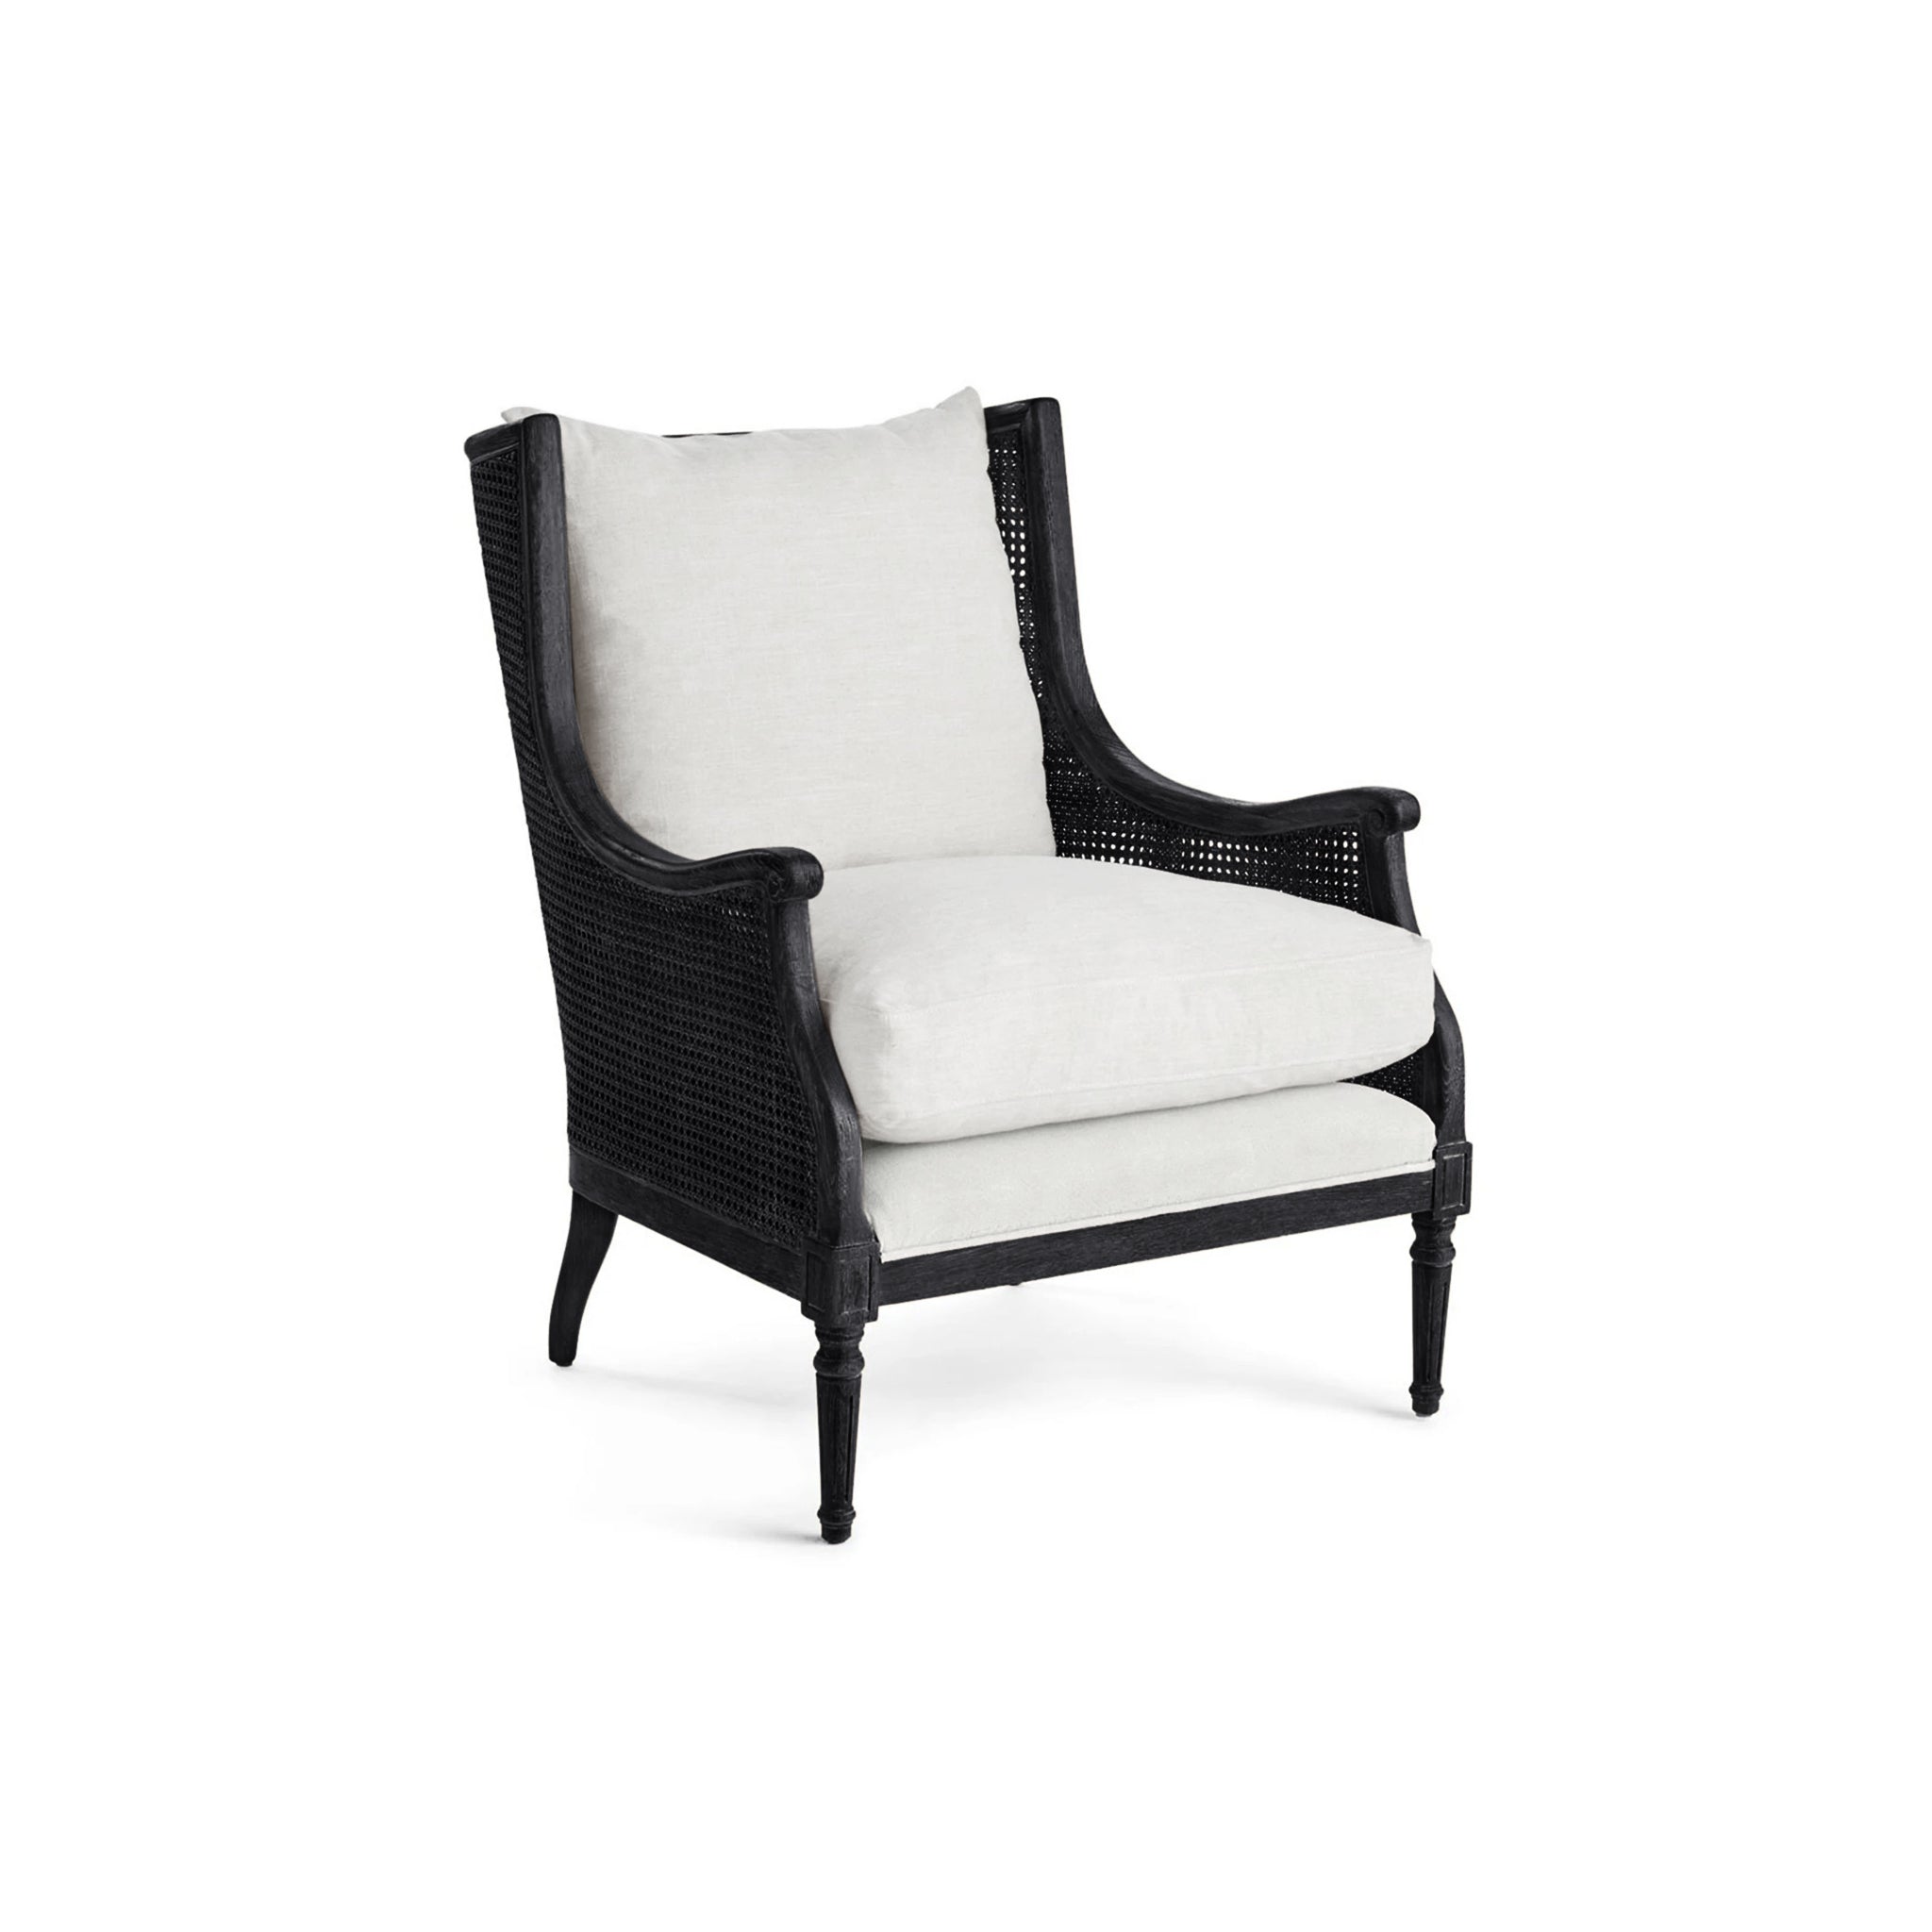 Front Isometric View of the Halle Cane Back Chair (Color - Black) on a White Background